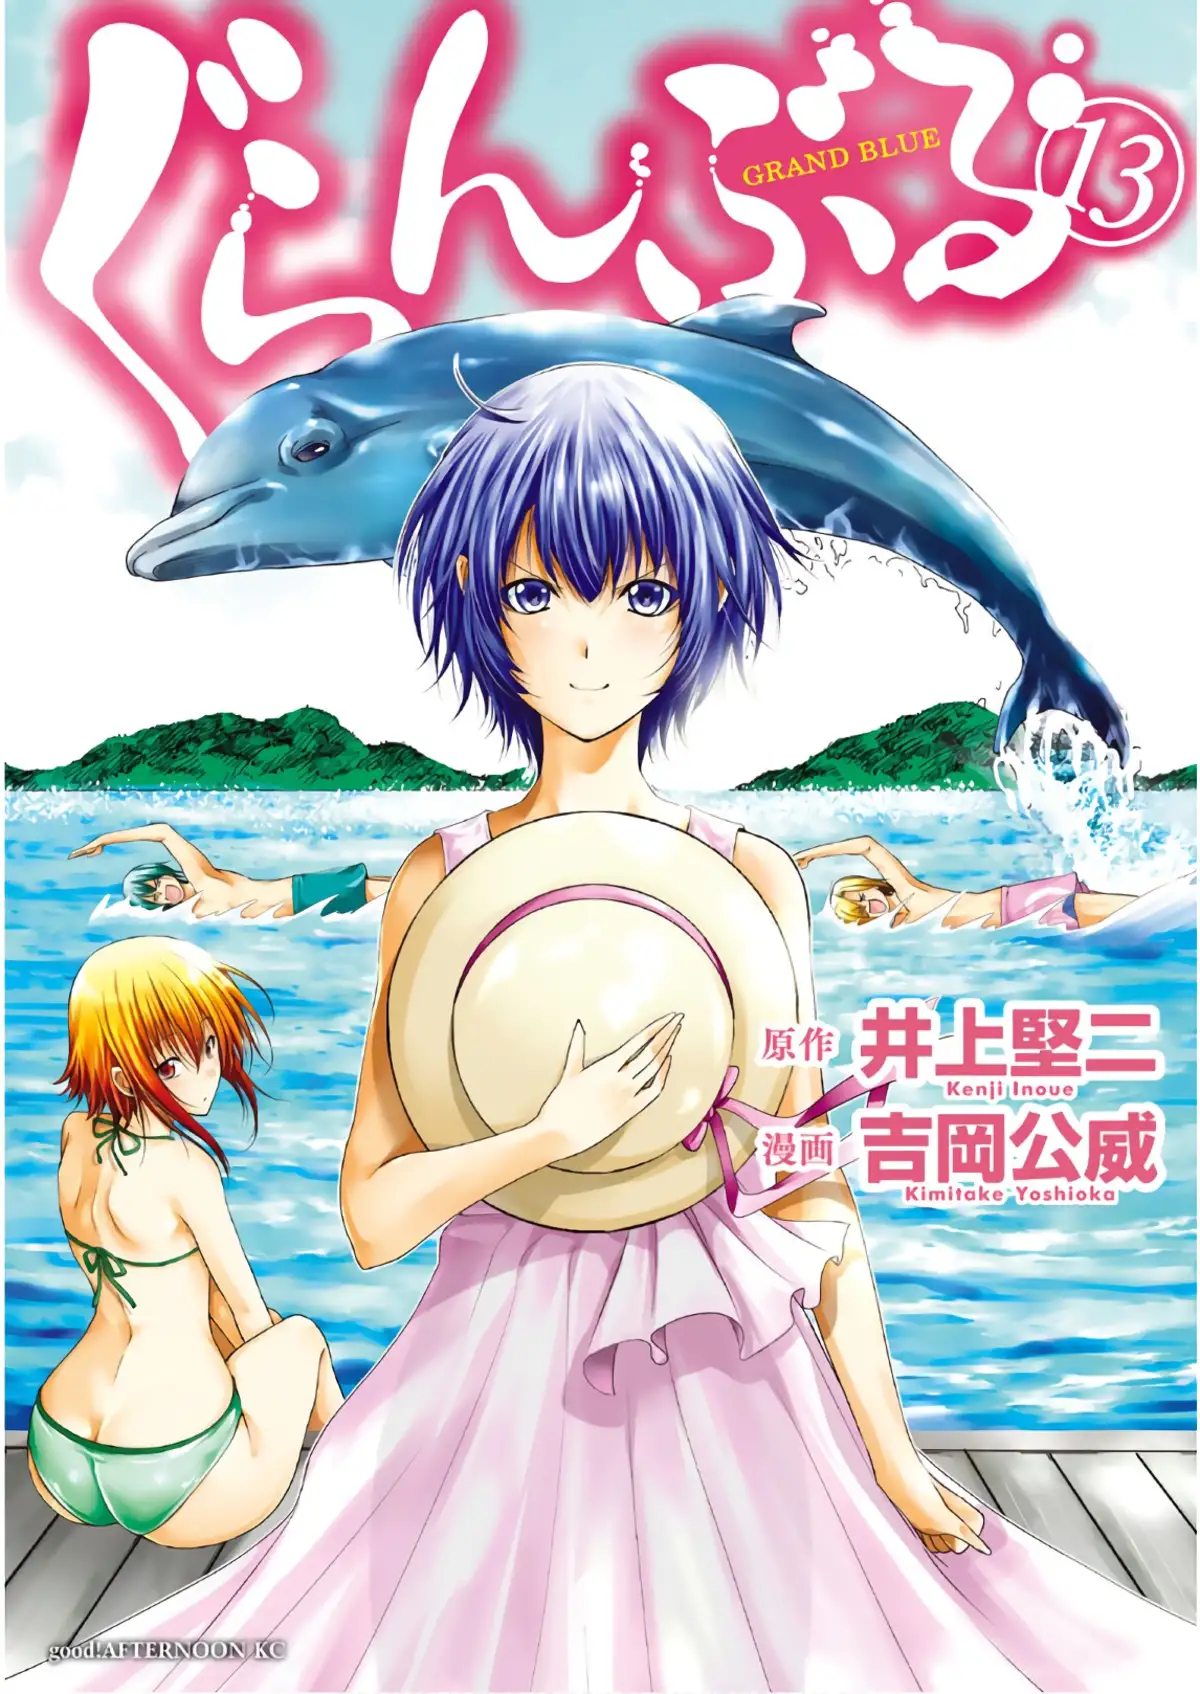 Grand Blue Volume 13 page 1